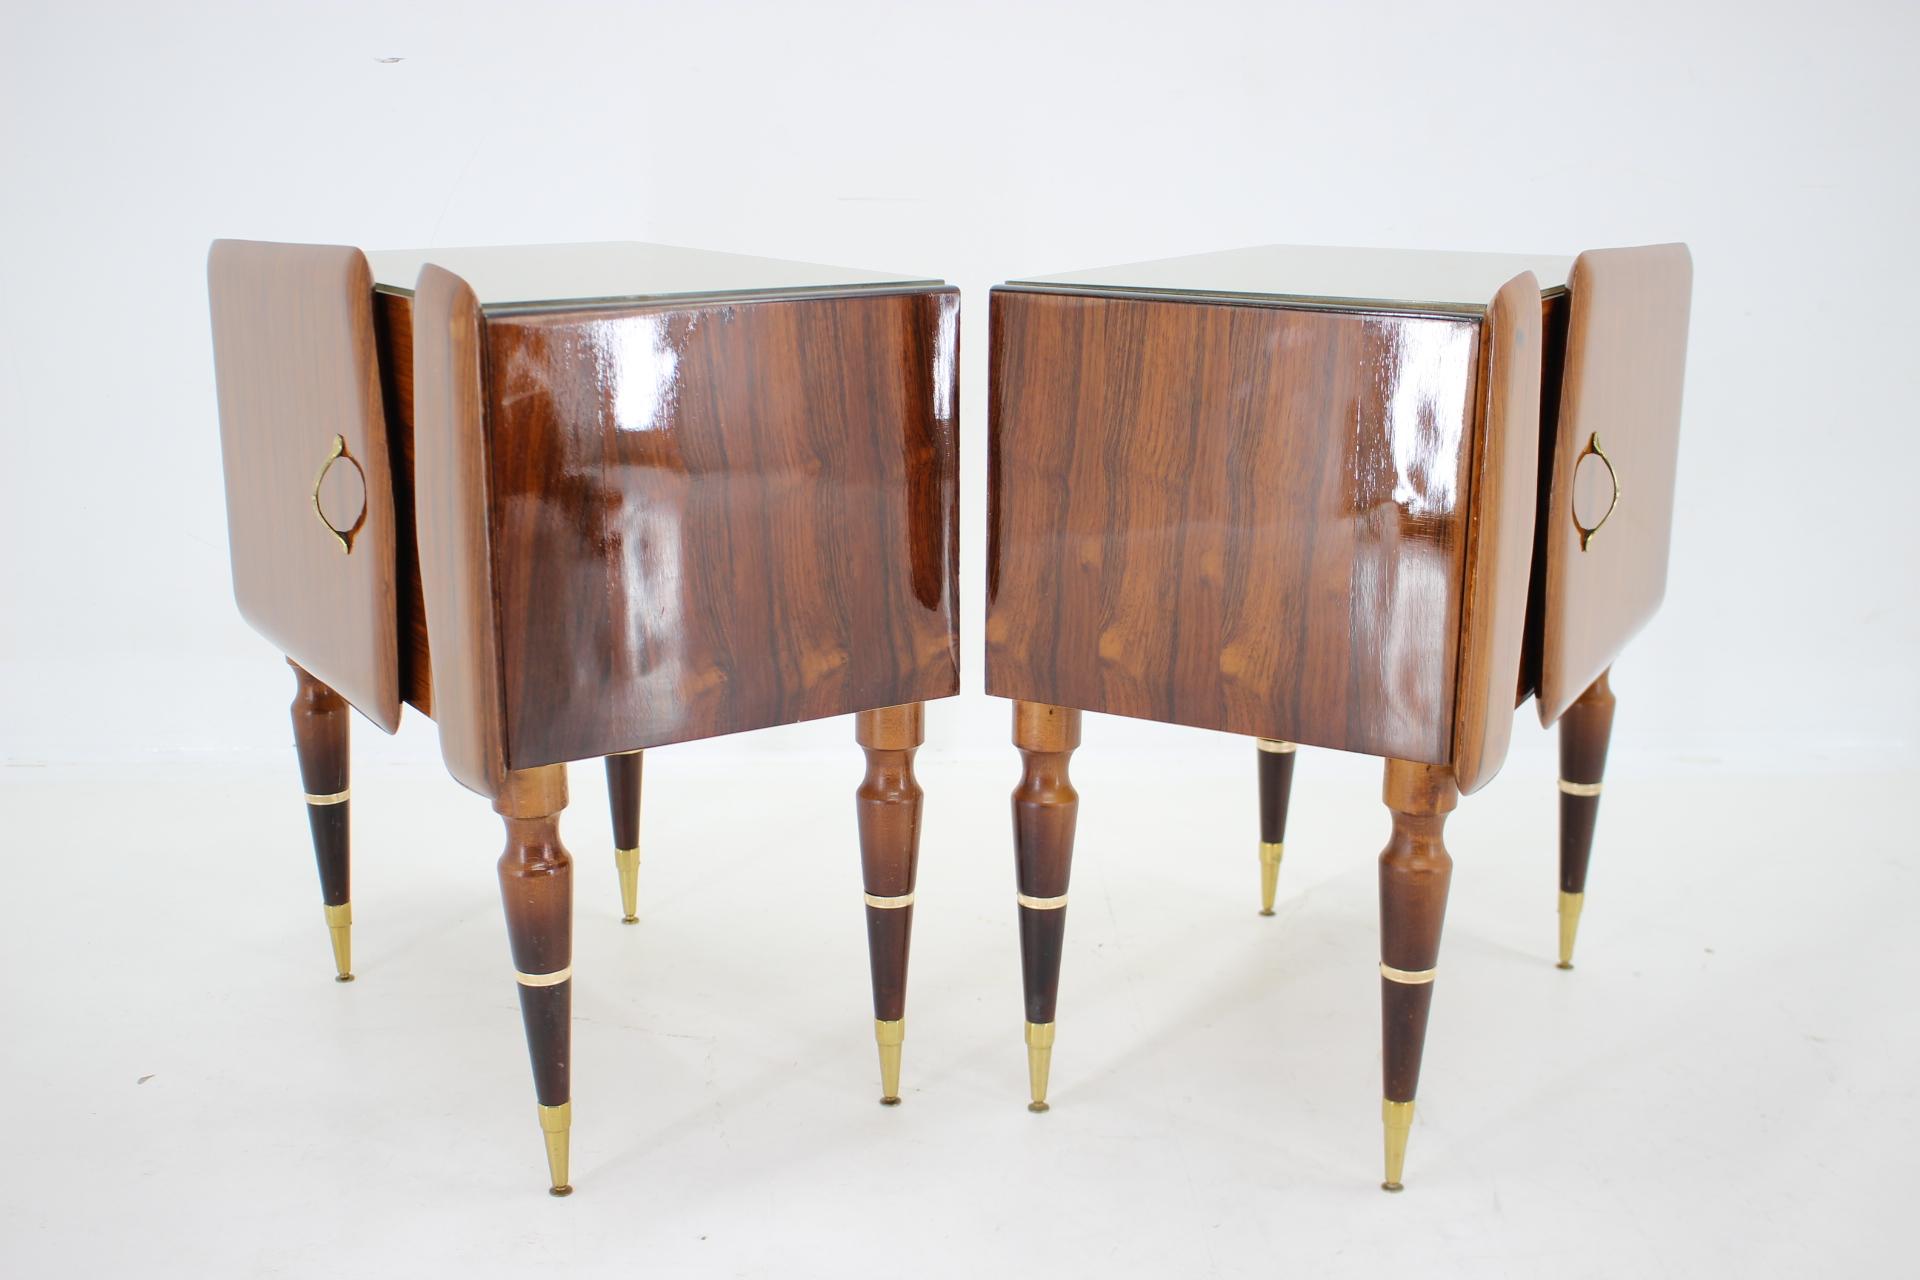 1960s Pair of Sculptural Wooden Bedside Tables, Italy For Sale 3